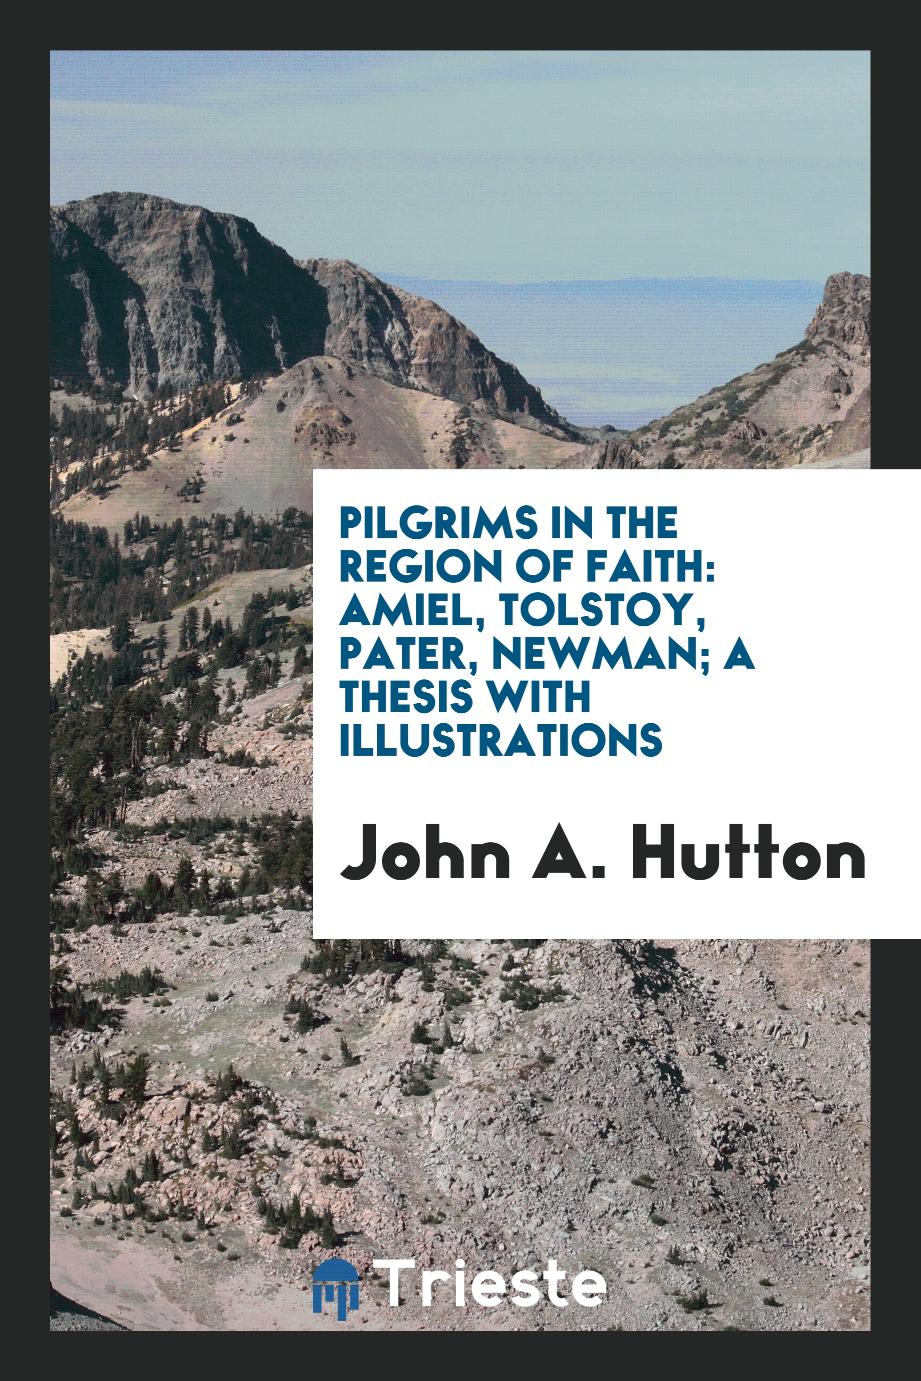 Pilgrims in the region of faith: Amiel, Tolstoy, Pater, Newman; a thesis with illustrations